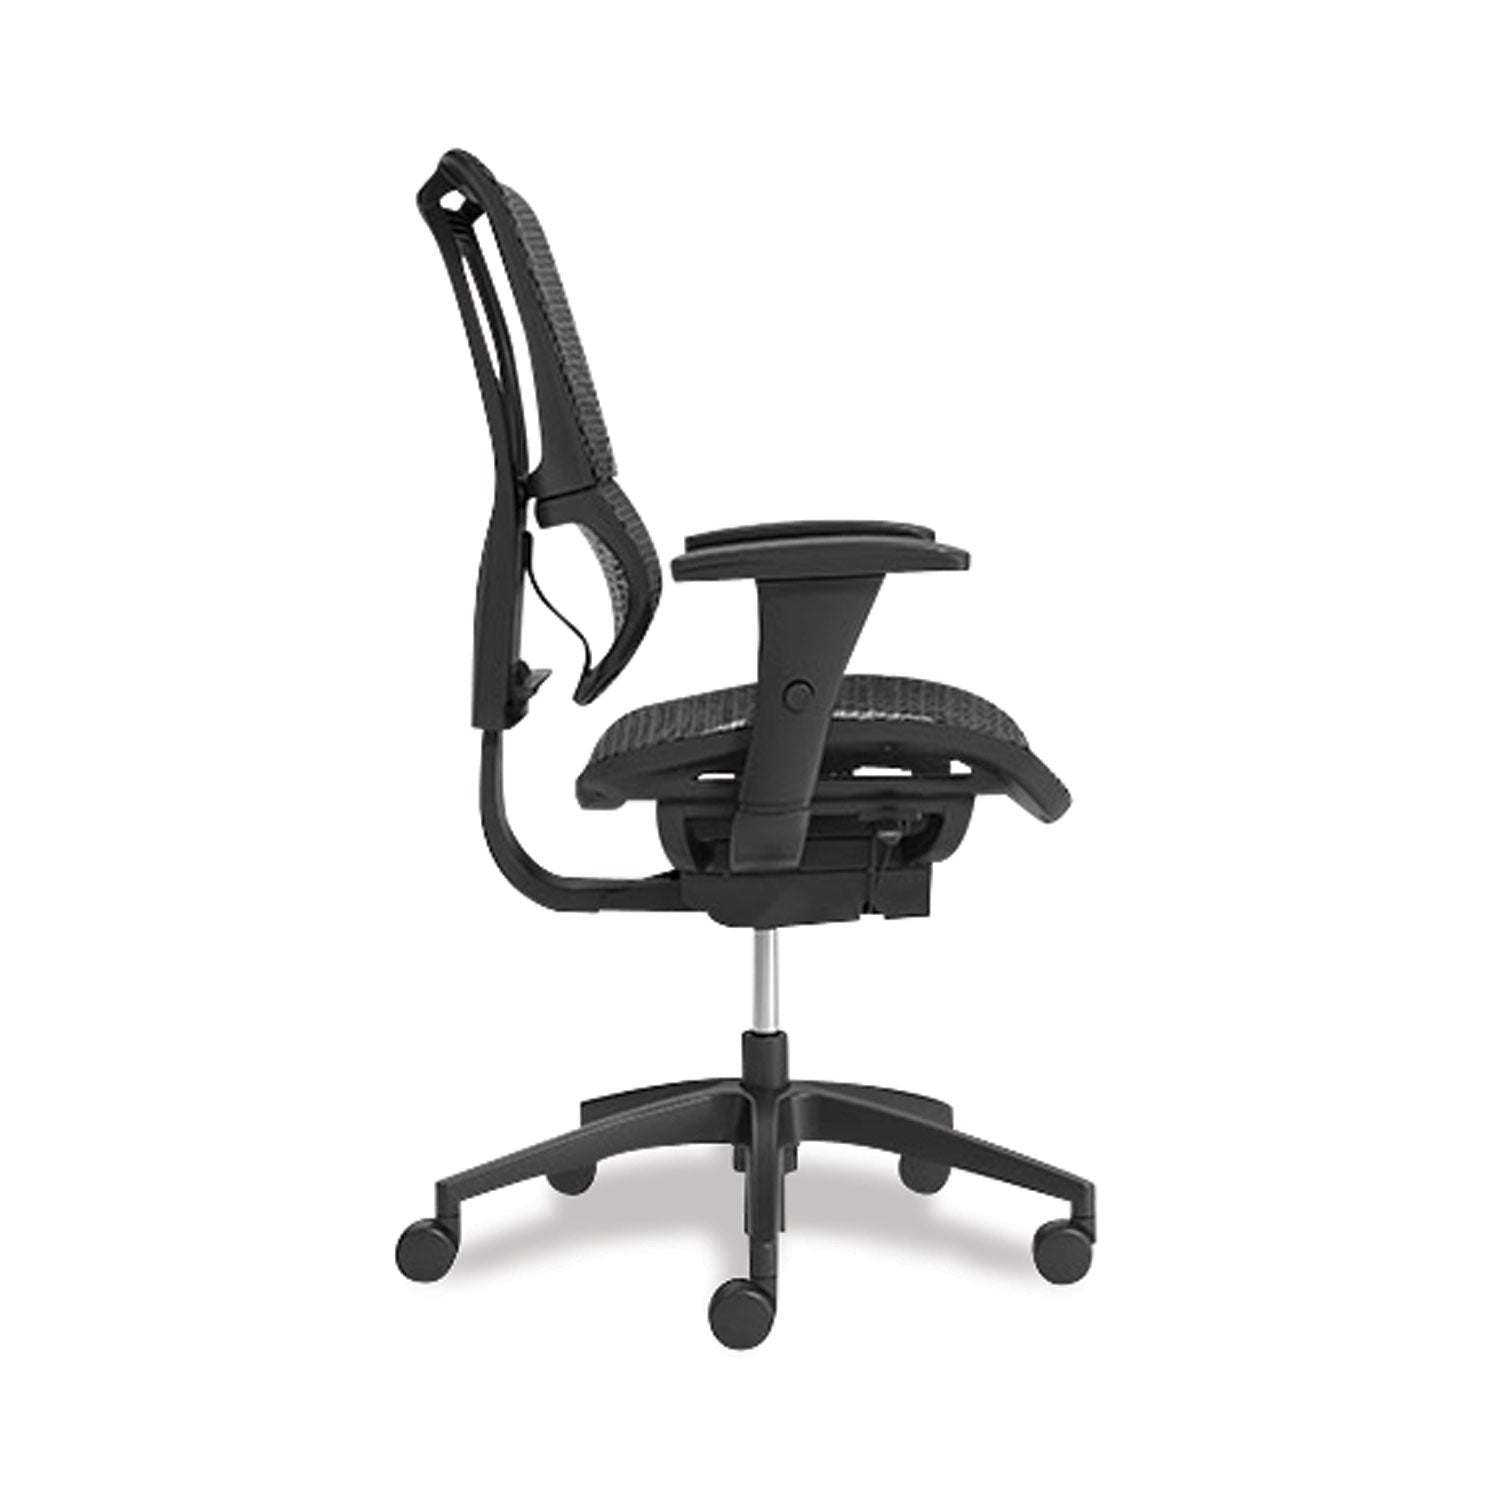 flexfit-1500tm-mesh-task-chair-suppports-up-to-300-lbs167-to-2026-seat-height-black-seat-black-back-black-base_uos28570cc - 2